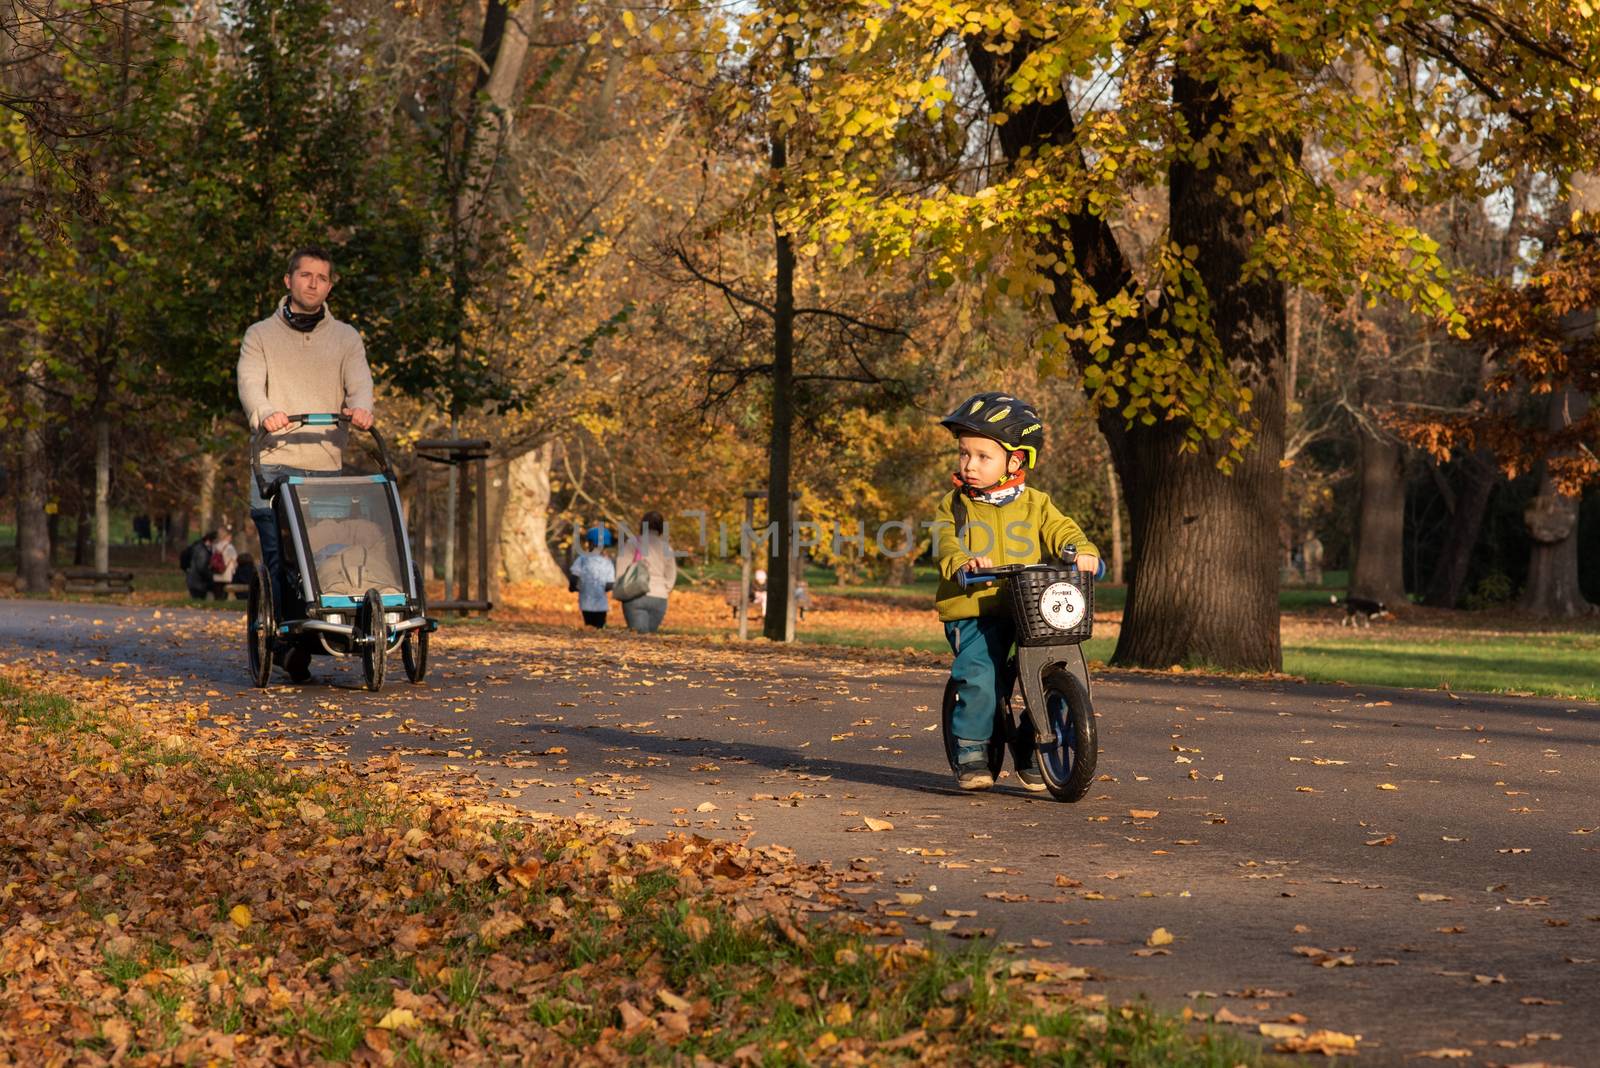 11/14/2020. Park Stromovka. Prague czech Republic. A kid is riding his motorbike in the park on a Sunday winter day. by gonzalobell